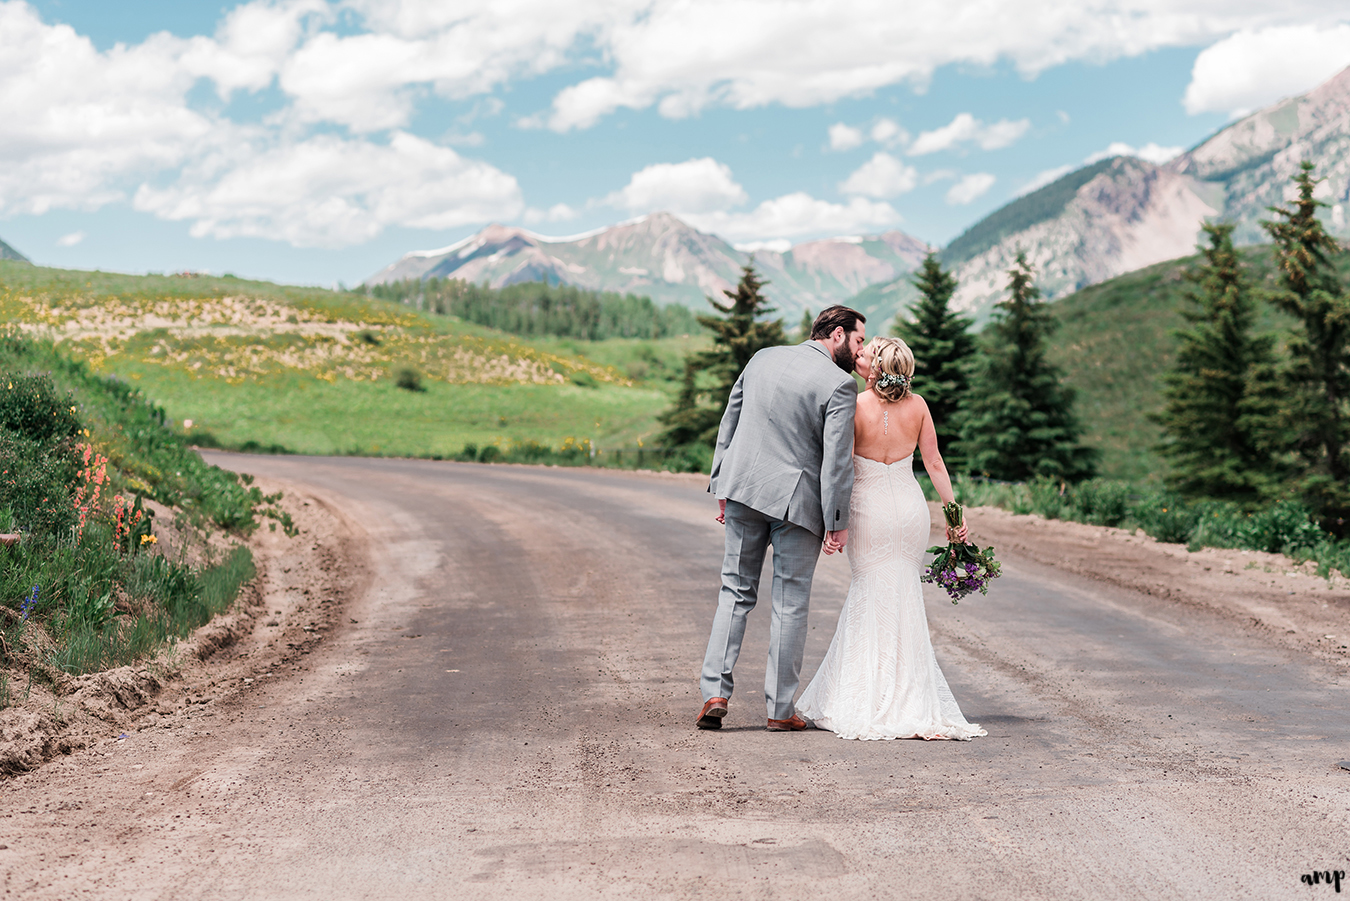 Dan and Courtney walk down the road to Gothic at the edge of Crested Butte